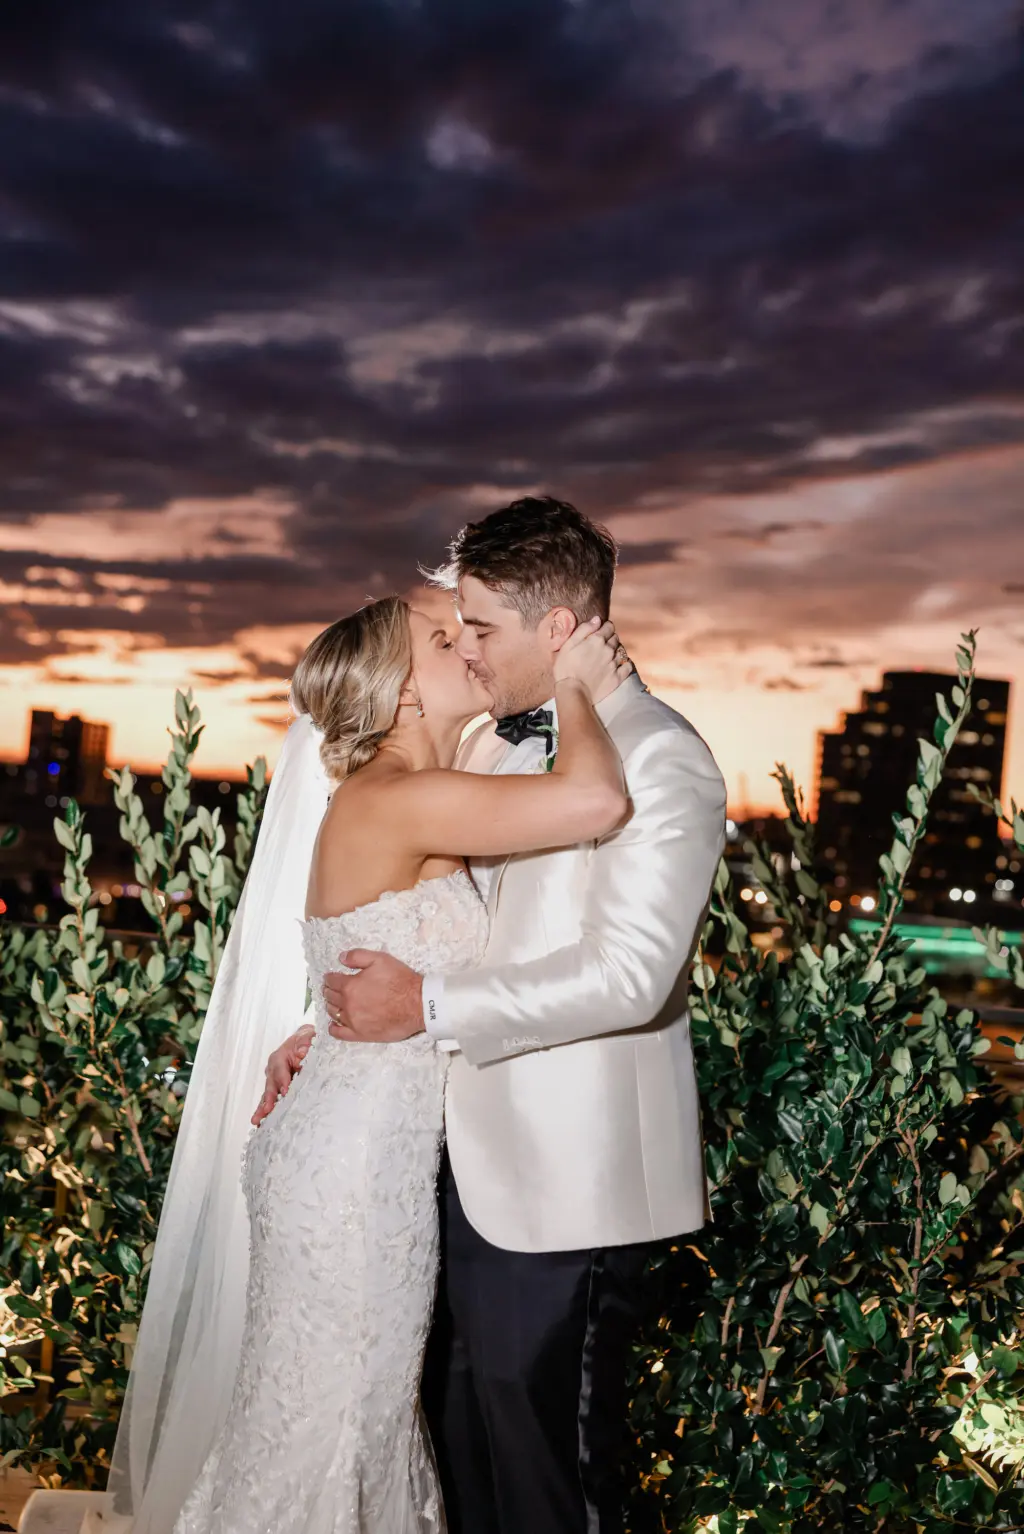 Bride and Groom Just Married Romantic Sunset Rooftop Wedding Ceremony Inspiration